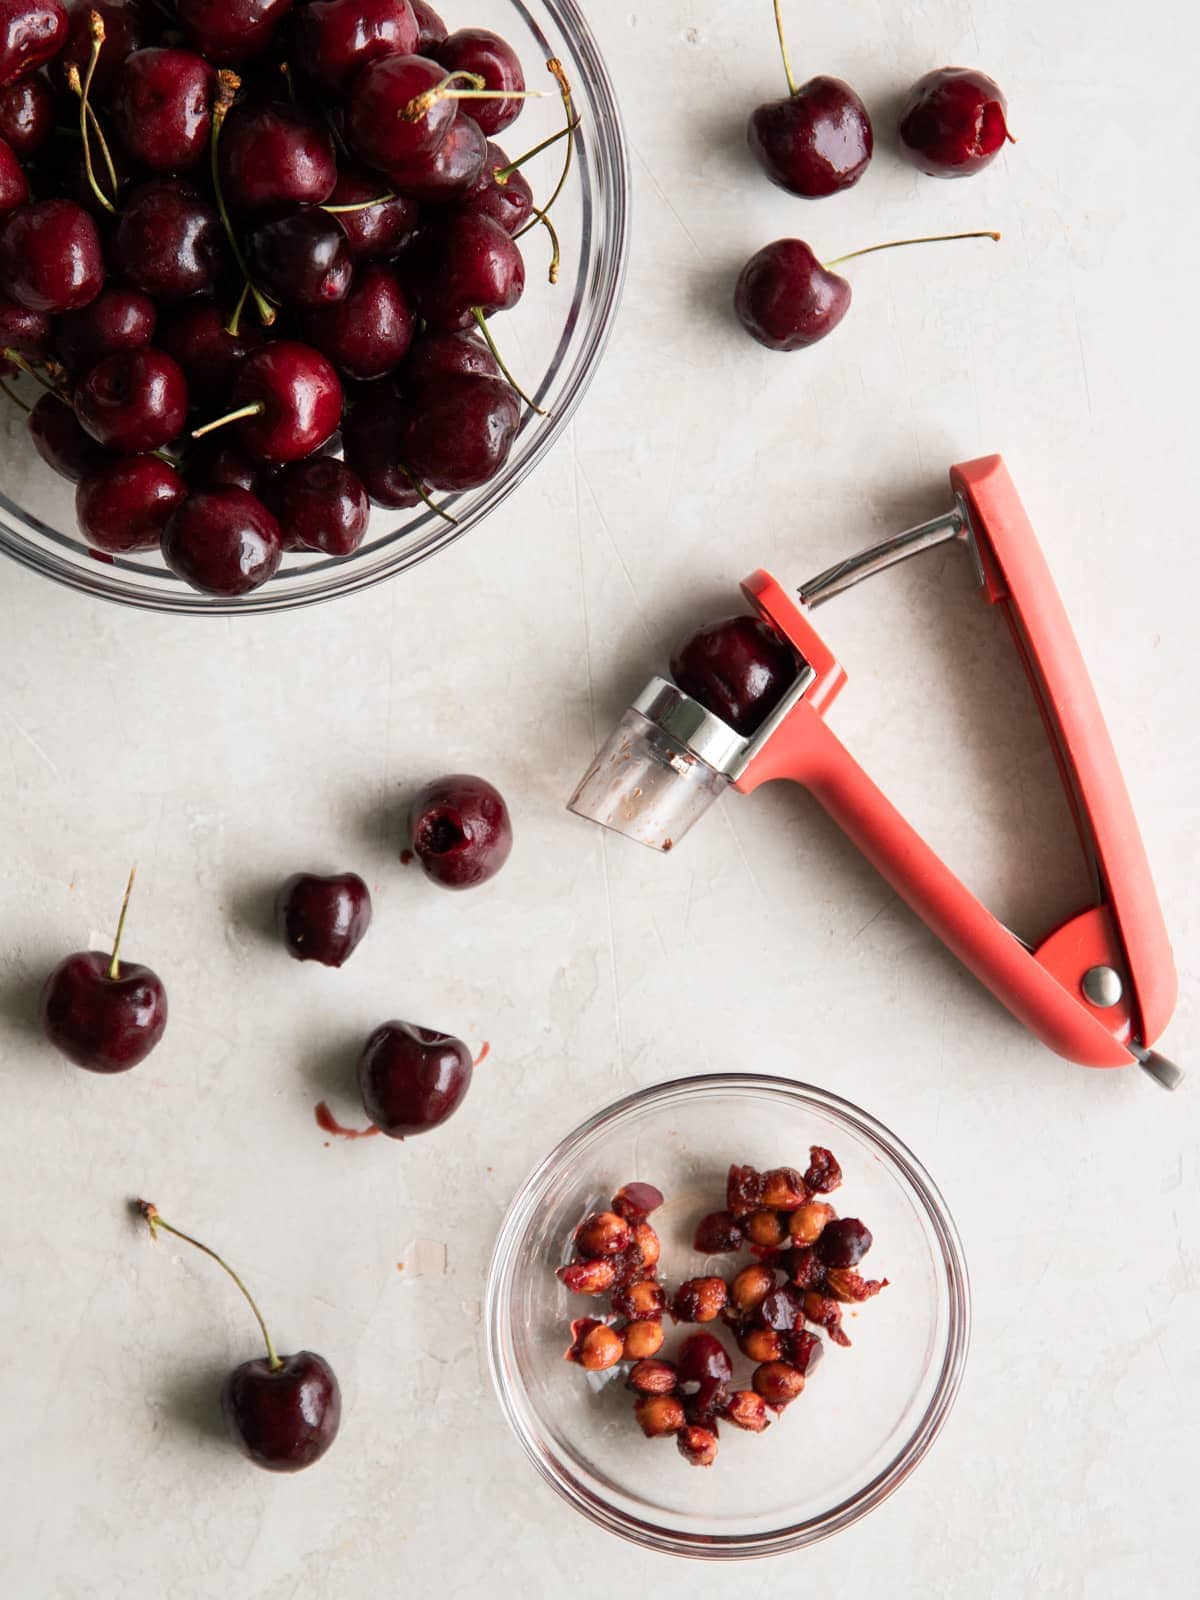 Bowl of cherries and a cherry pitter.